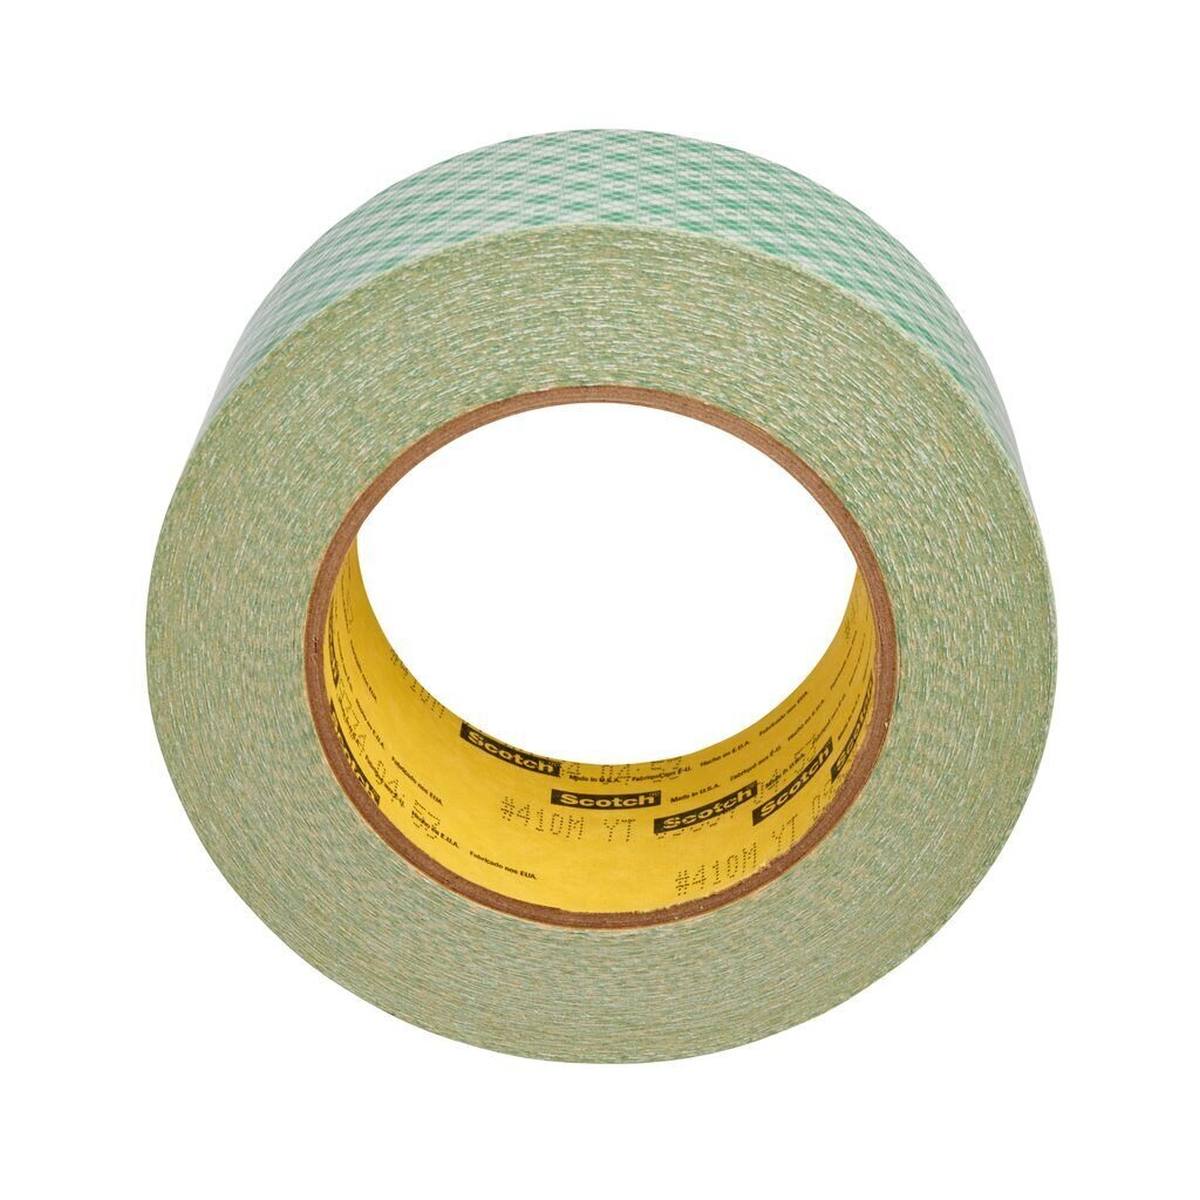 3M Double-sided adhesive tape with non-woven paper backing 410M, white, 19 mm x 33 m, 0.13 mm